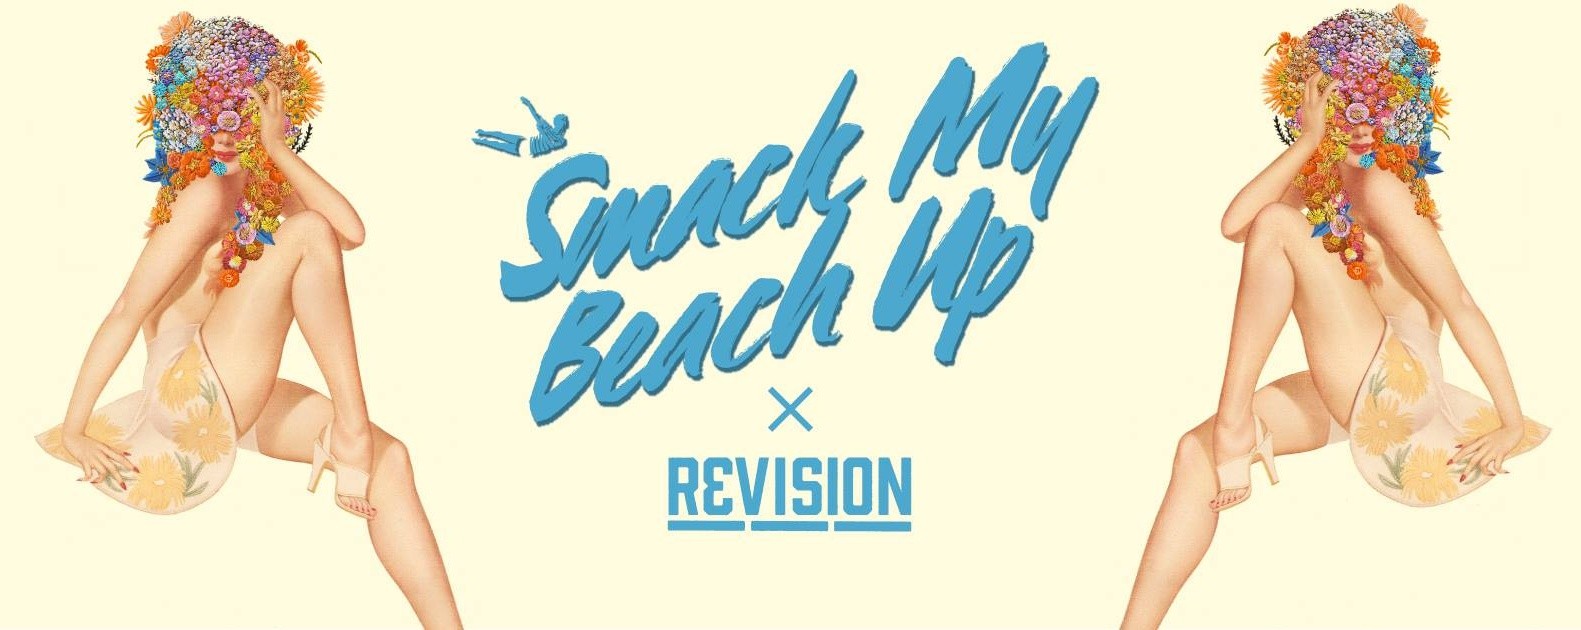 SMACK MY BEACH UP X REVISION